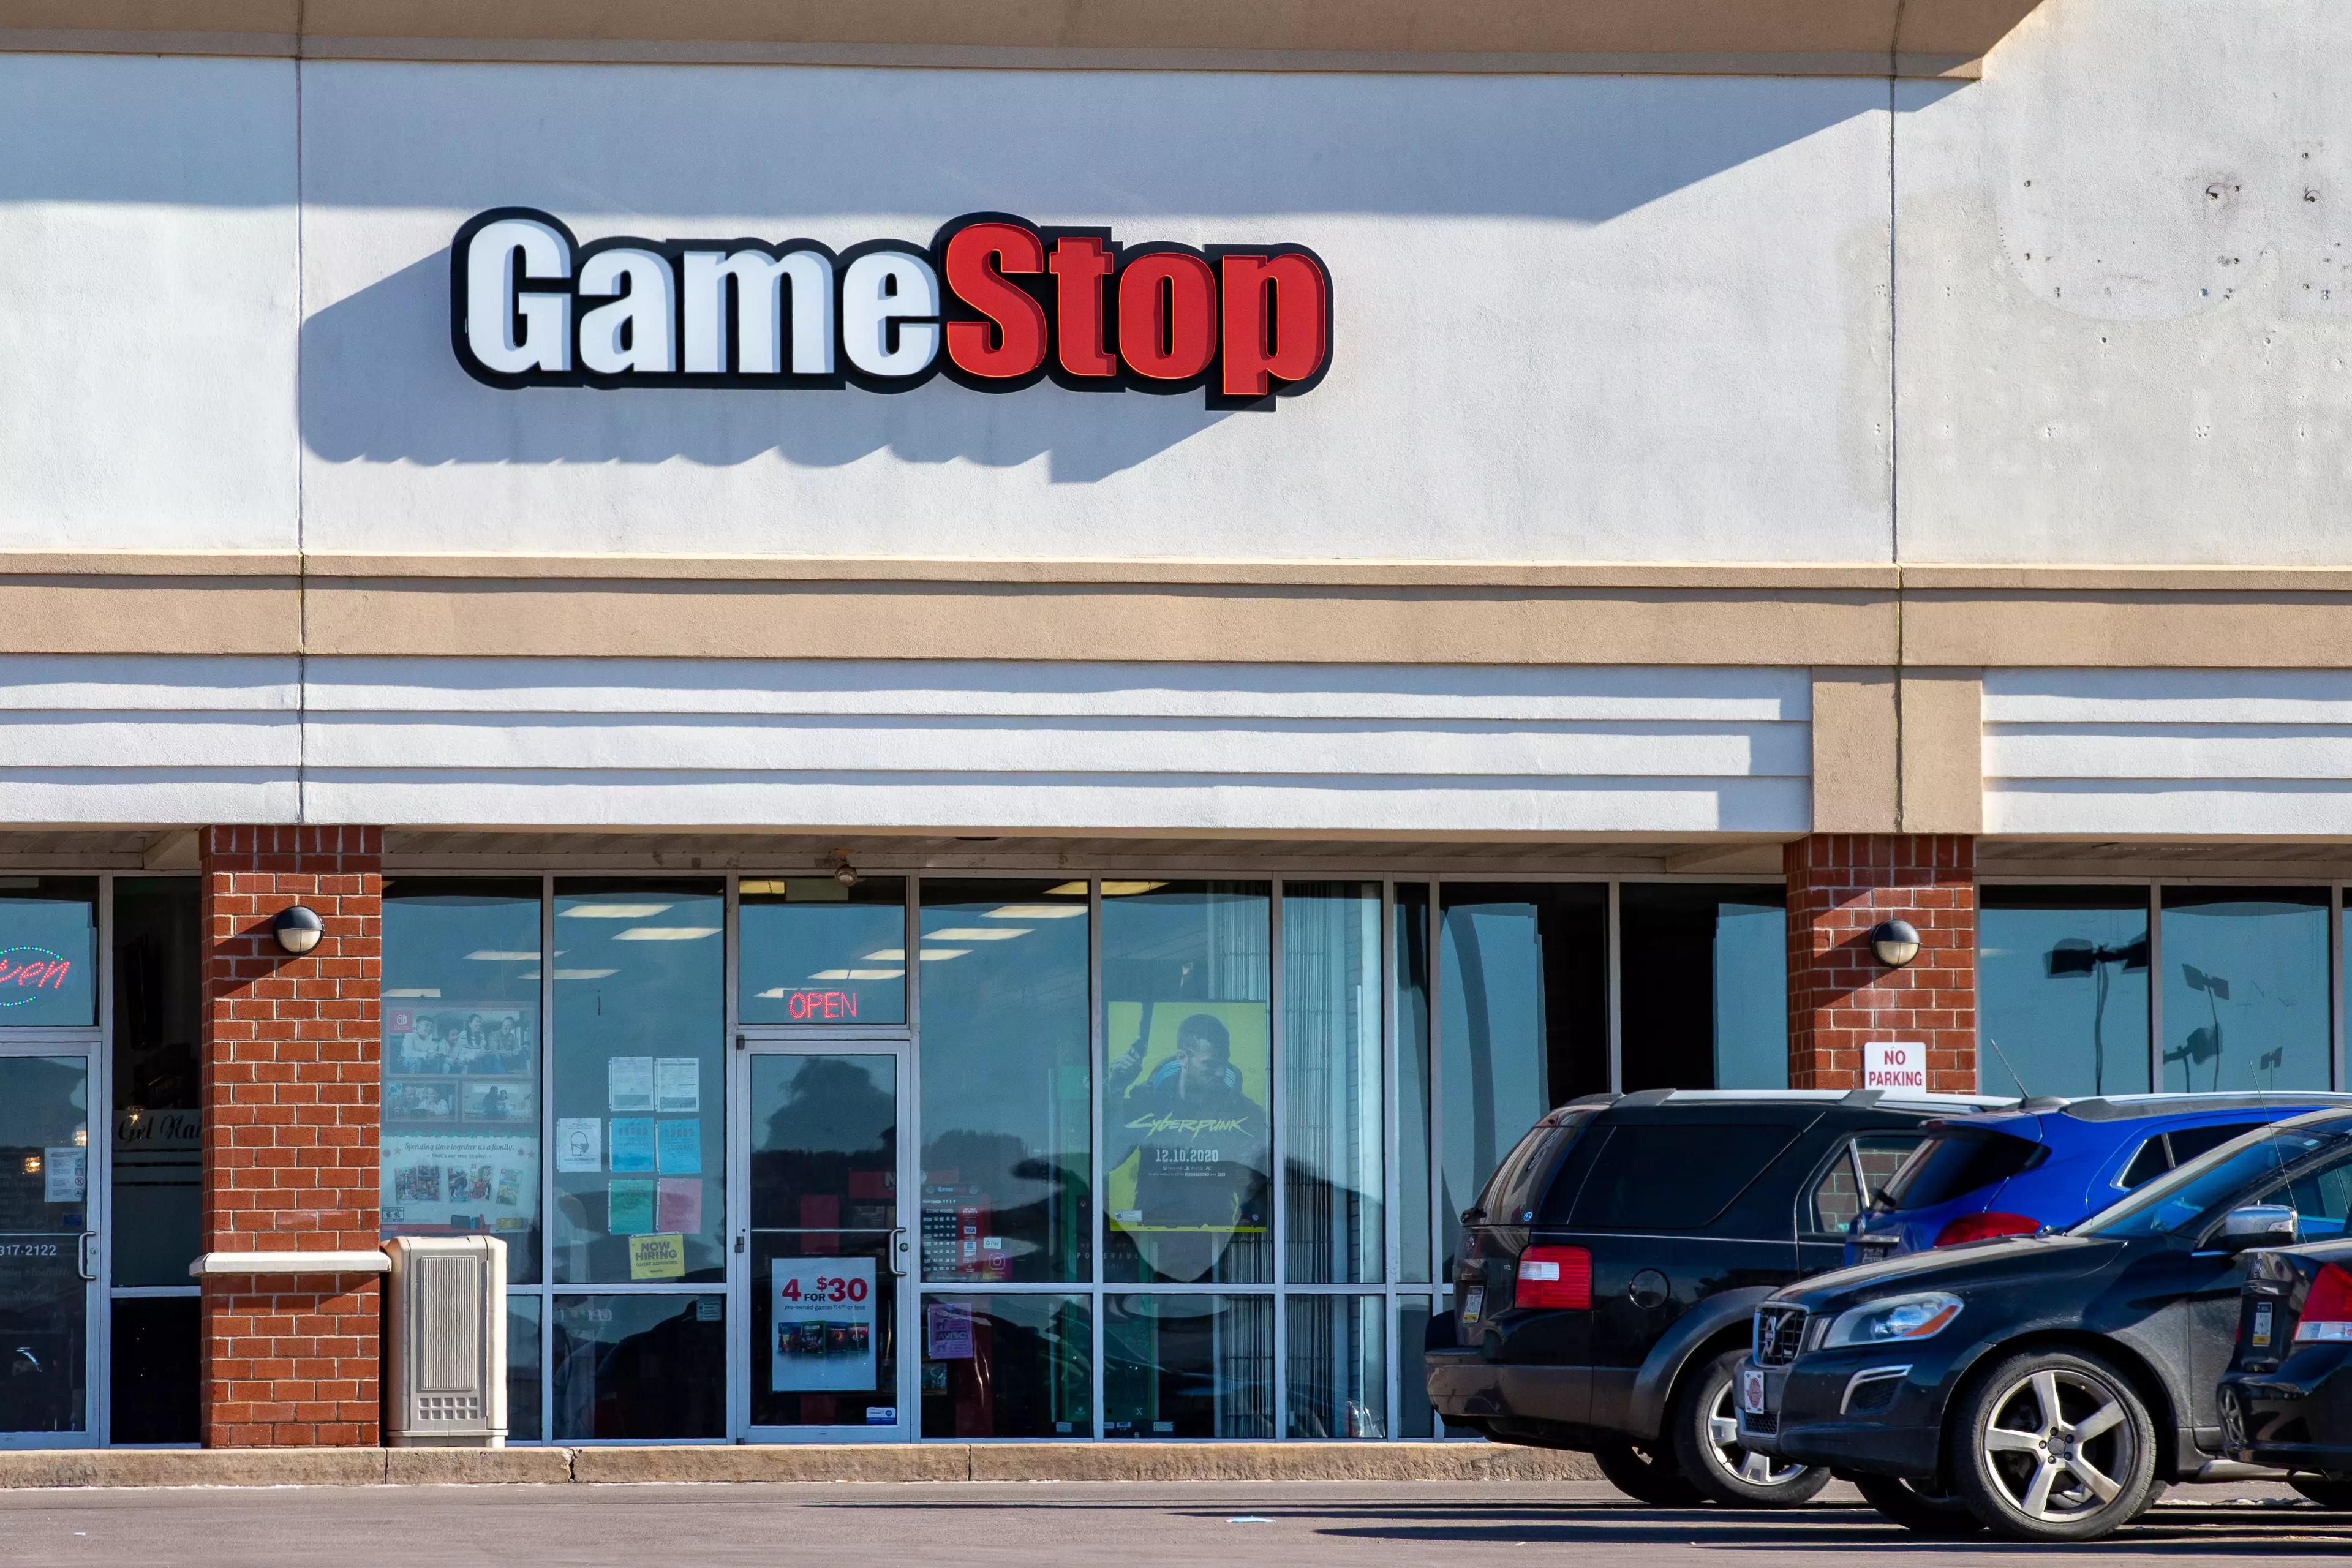 A film is said to be made about GameStop.